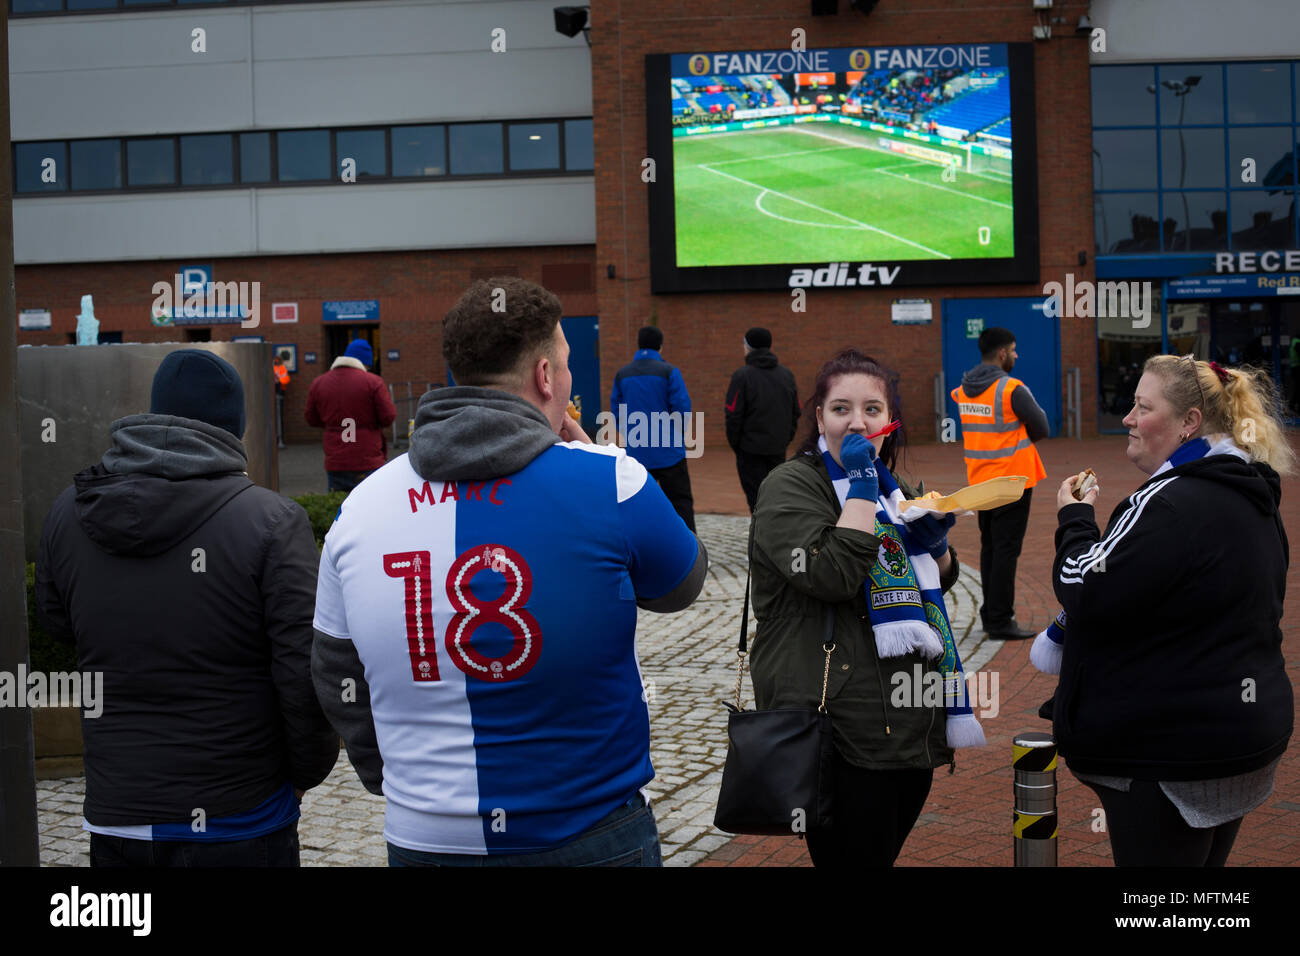 Fans gathering the outside the Blackburn End Stand before Blackburn Rovers played Shrewsbury Town in a Sky Bet League One fixture at Ewood Park. Both team were in the top three in the division at the start of the game. Blackburn won the match by 3 goals to 1, watched by a crowd of 13,579. Stock Photo